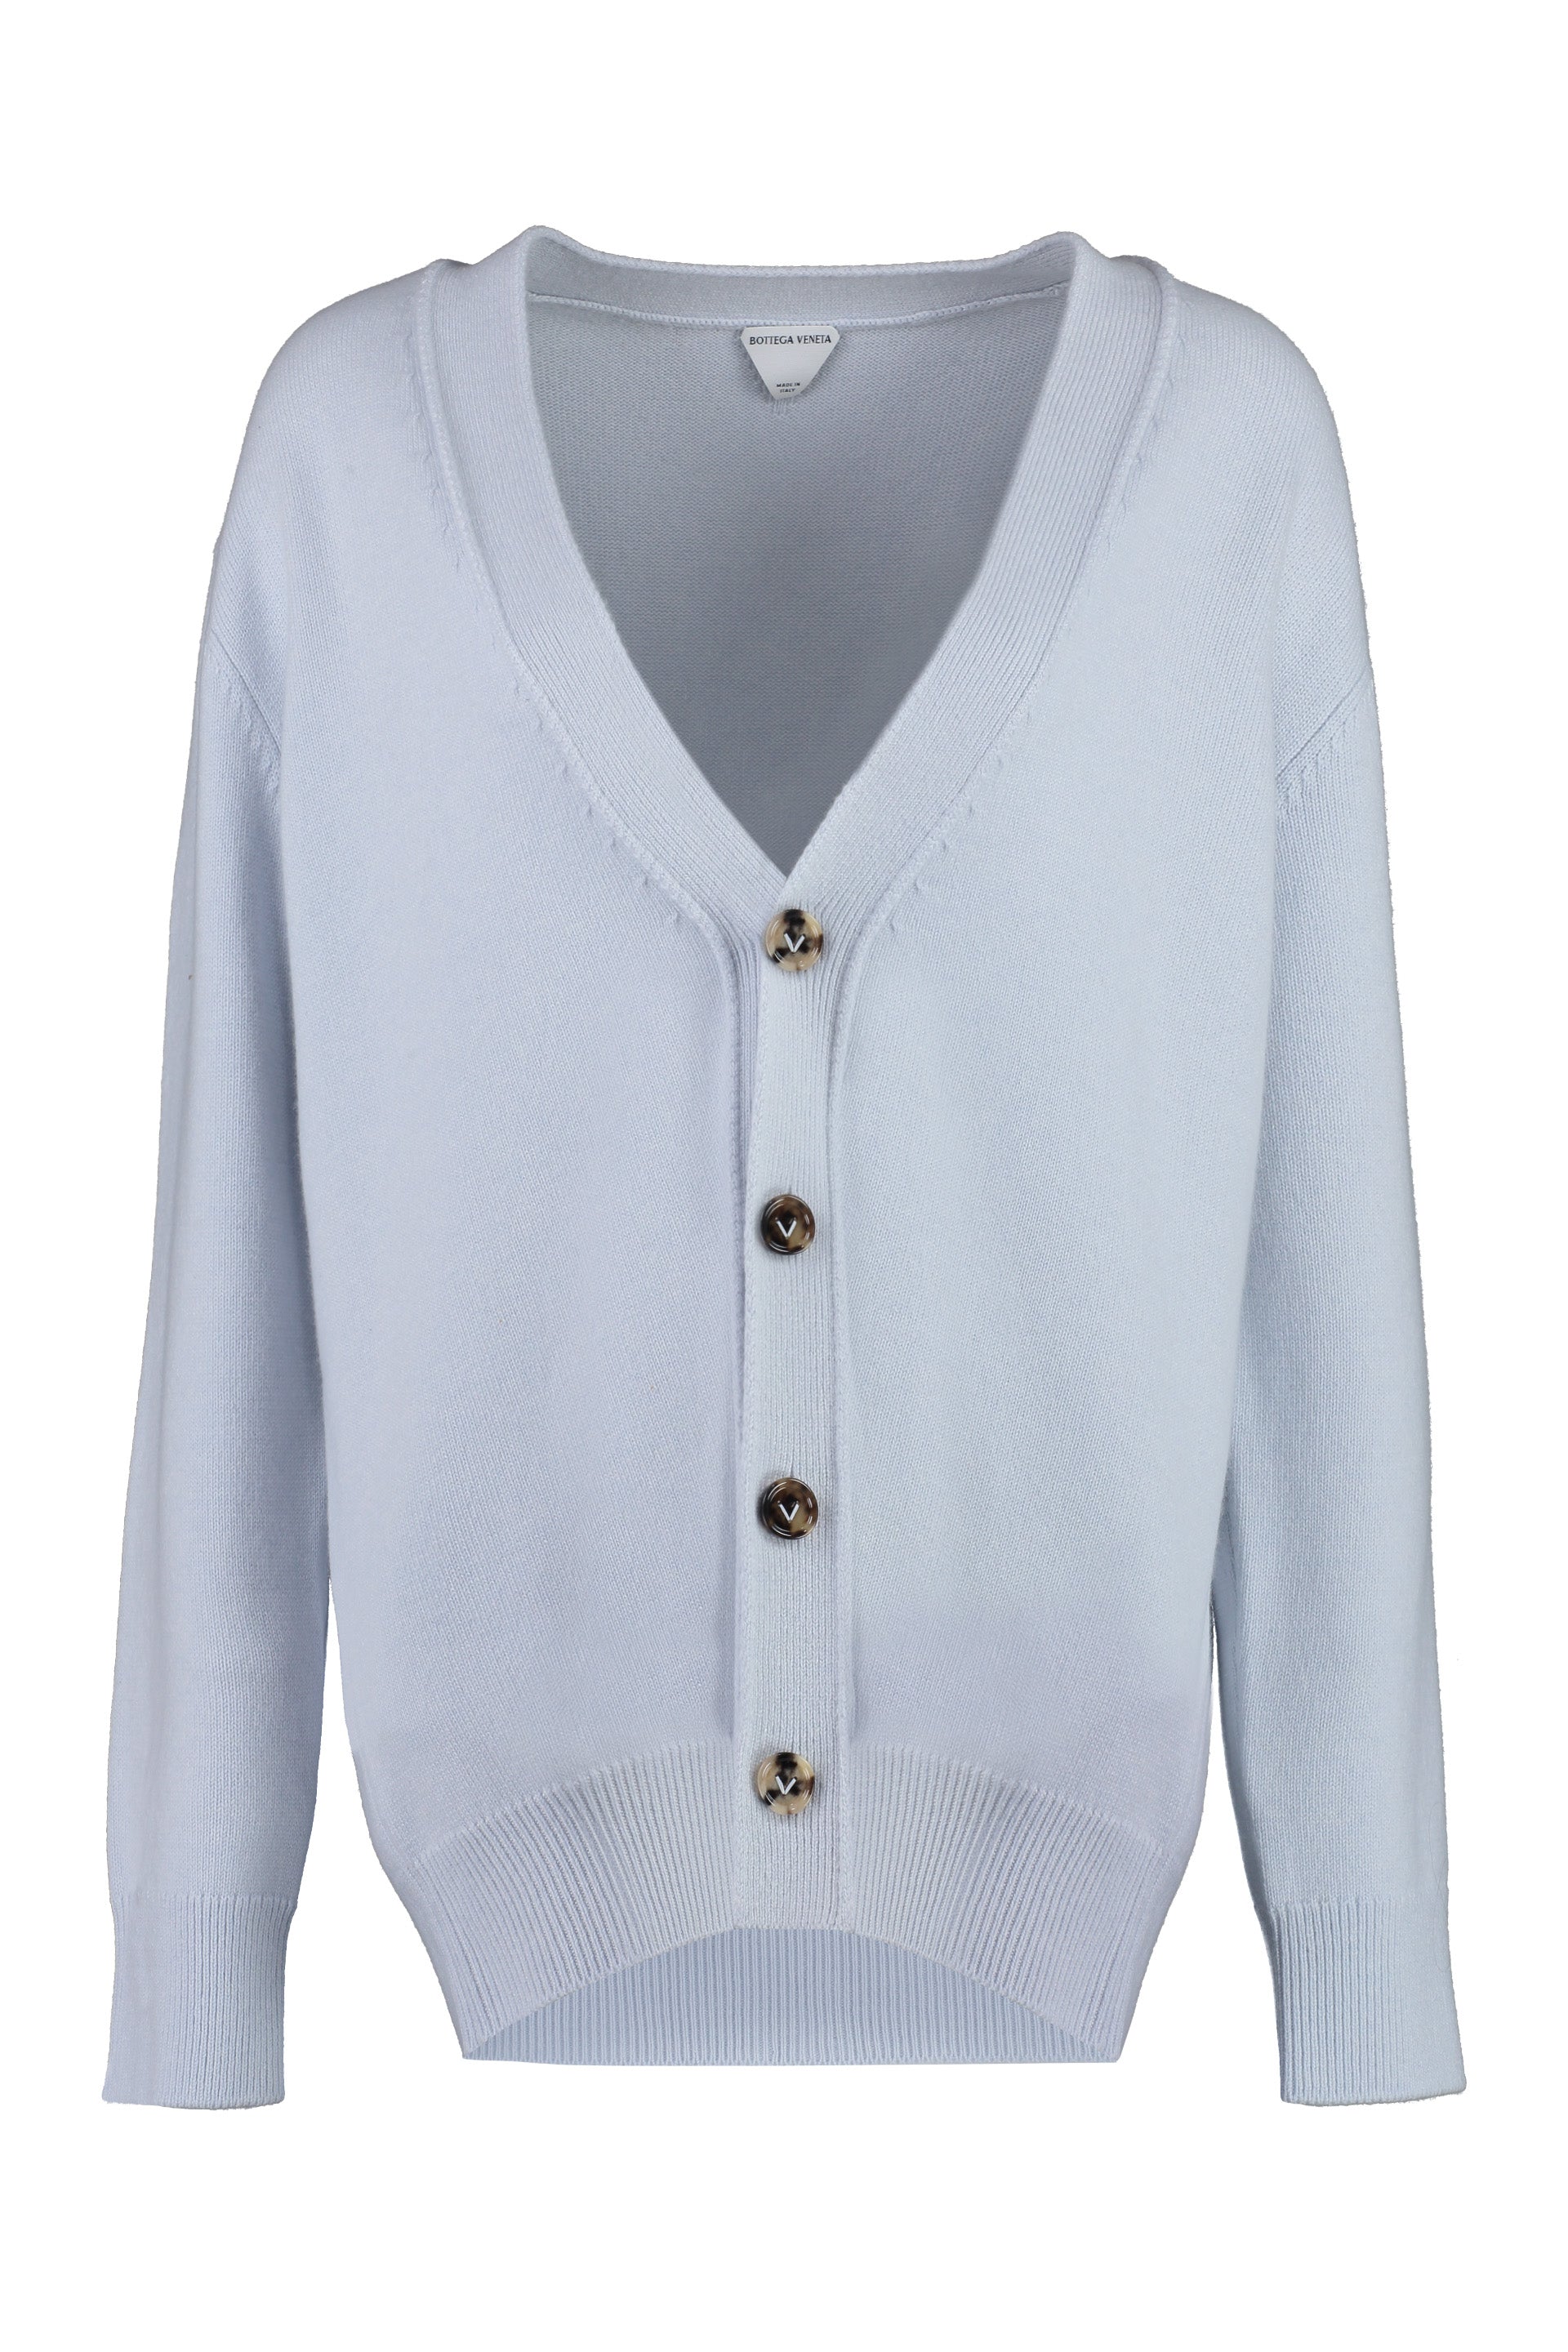 Shop Bottega Veneta Luxurious Cashmere Cardigan With Contrasting Elbow Patches For Women In Grey